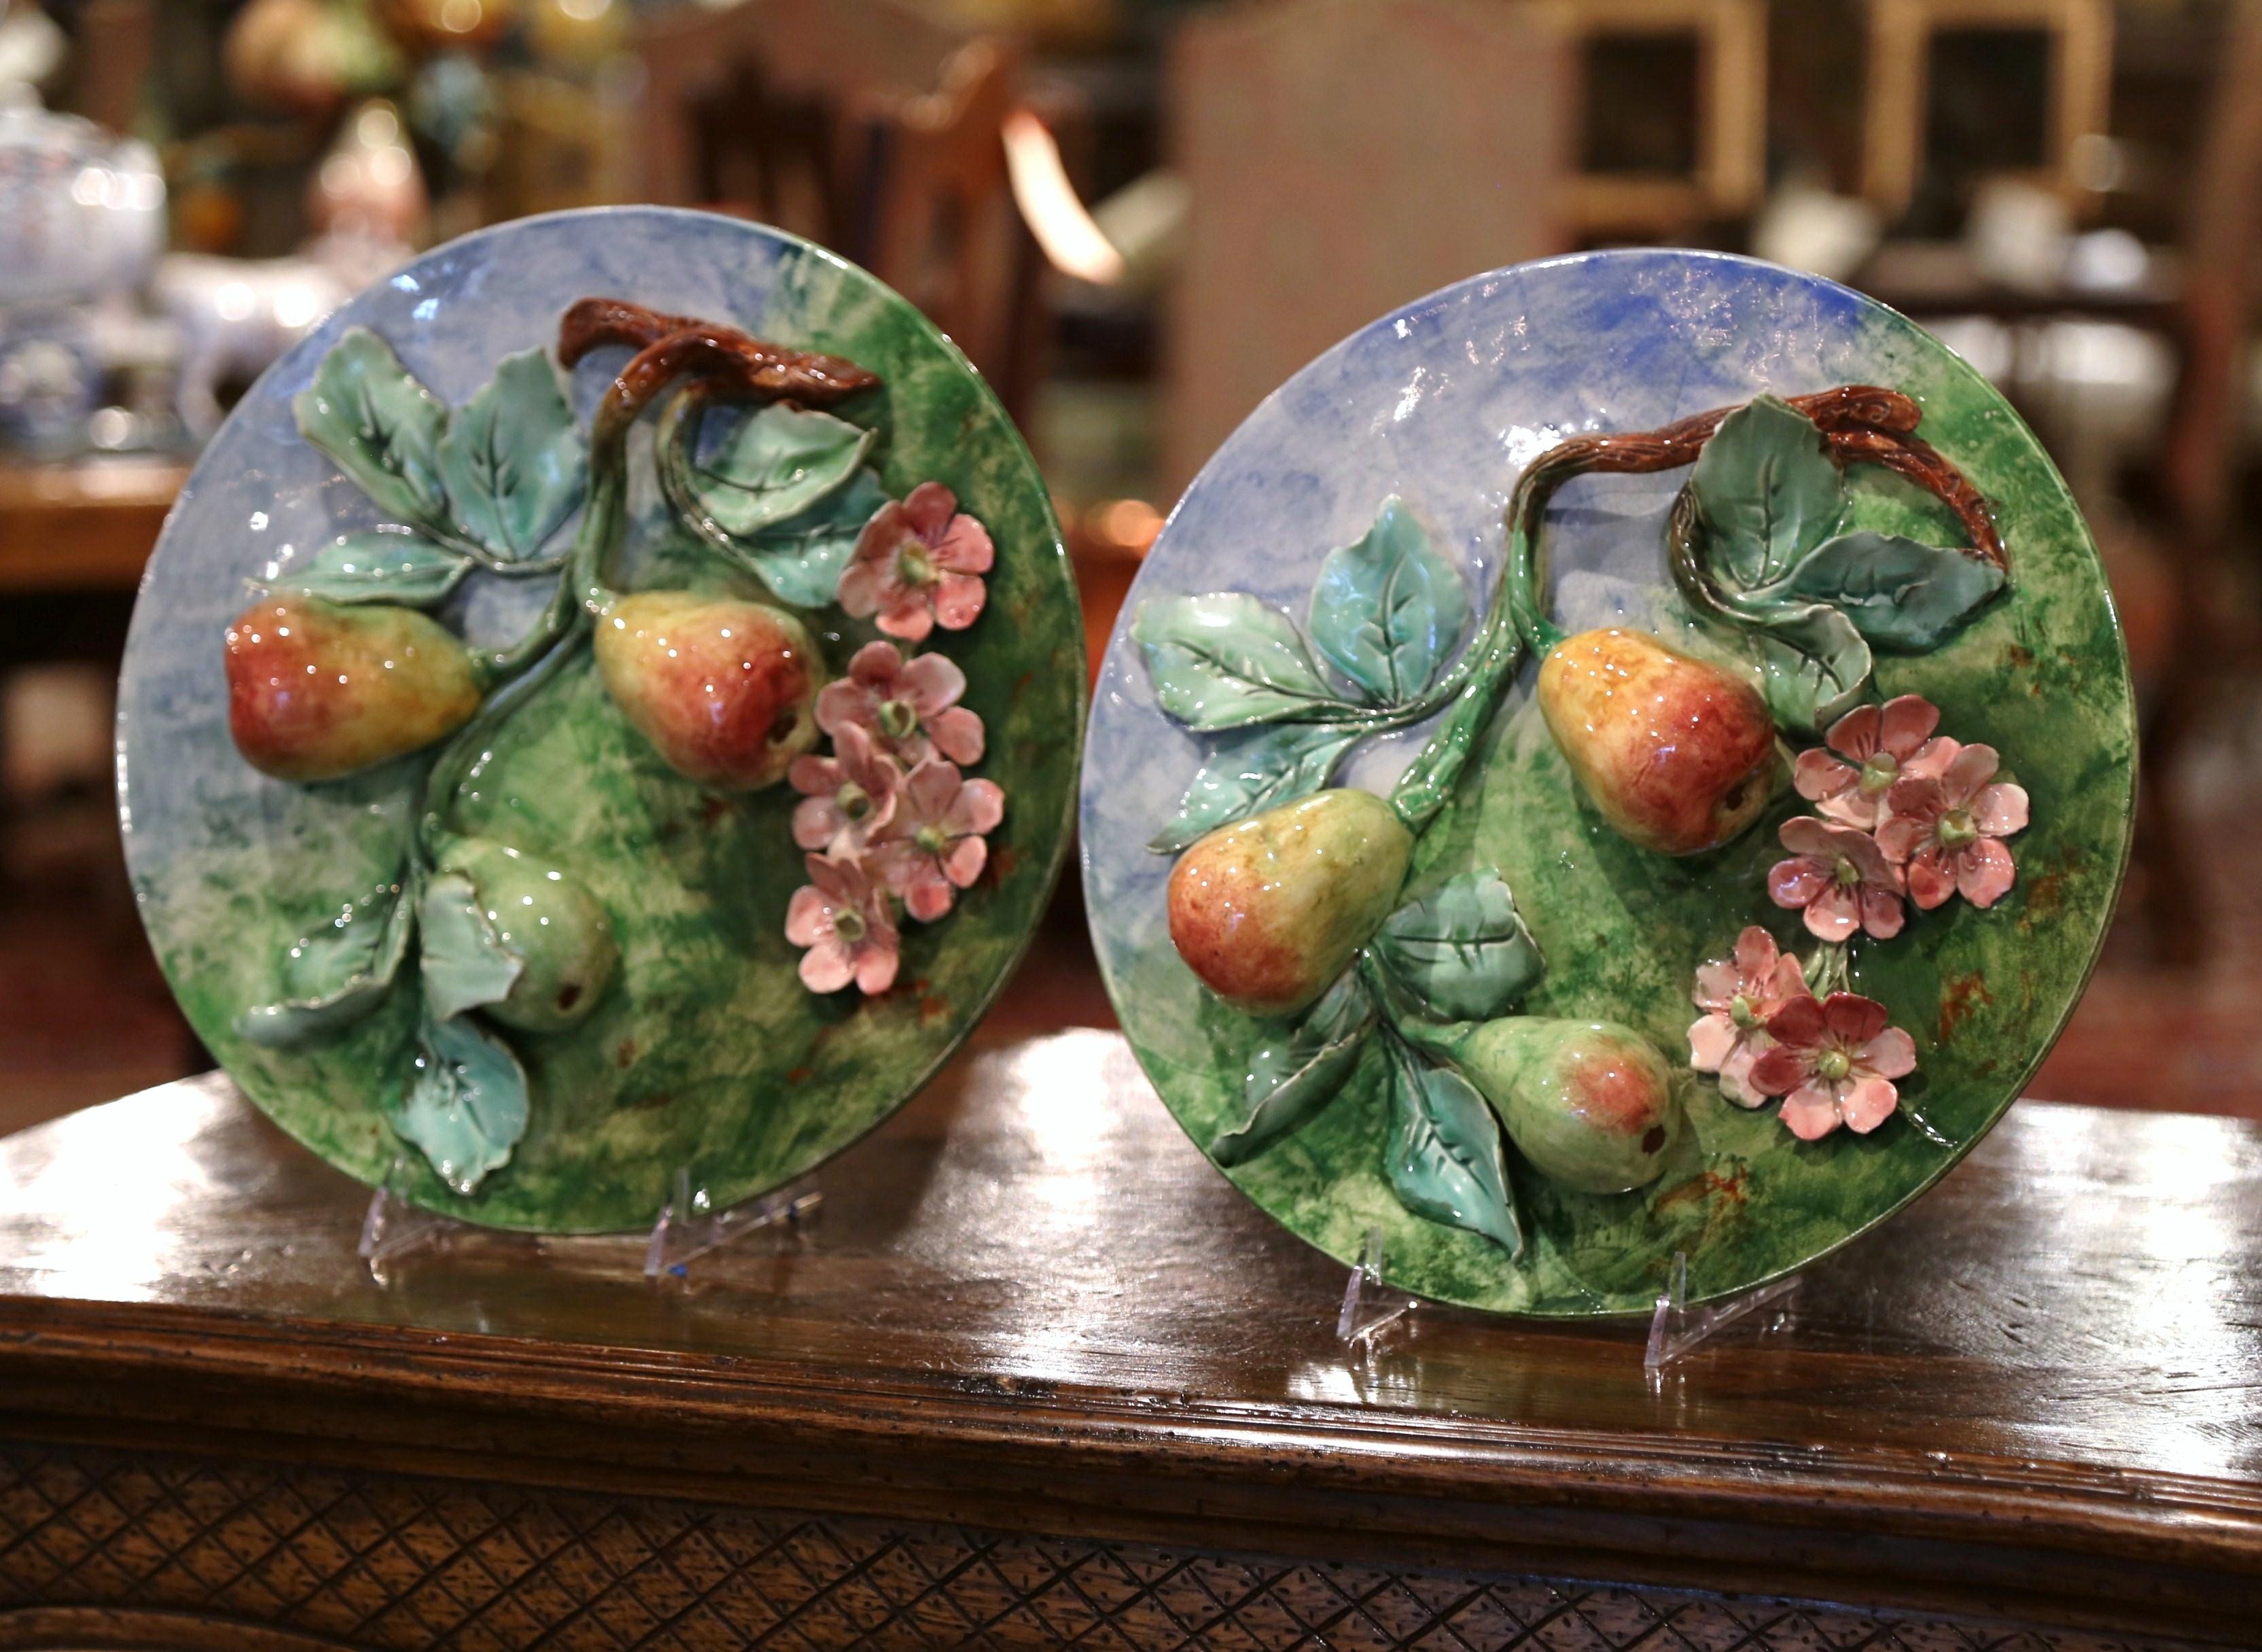 Add some color to your kitchen or dining room with this beautiful pair of antique Majolica plates, crafted in France, circa 1880, each colorful plate is decorated with a high-relief, sculptural pear fruit motifs hanging from tree branches covered